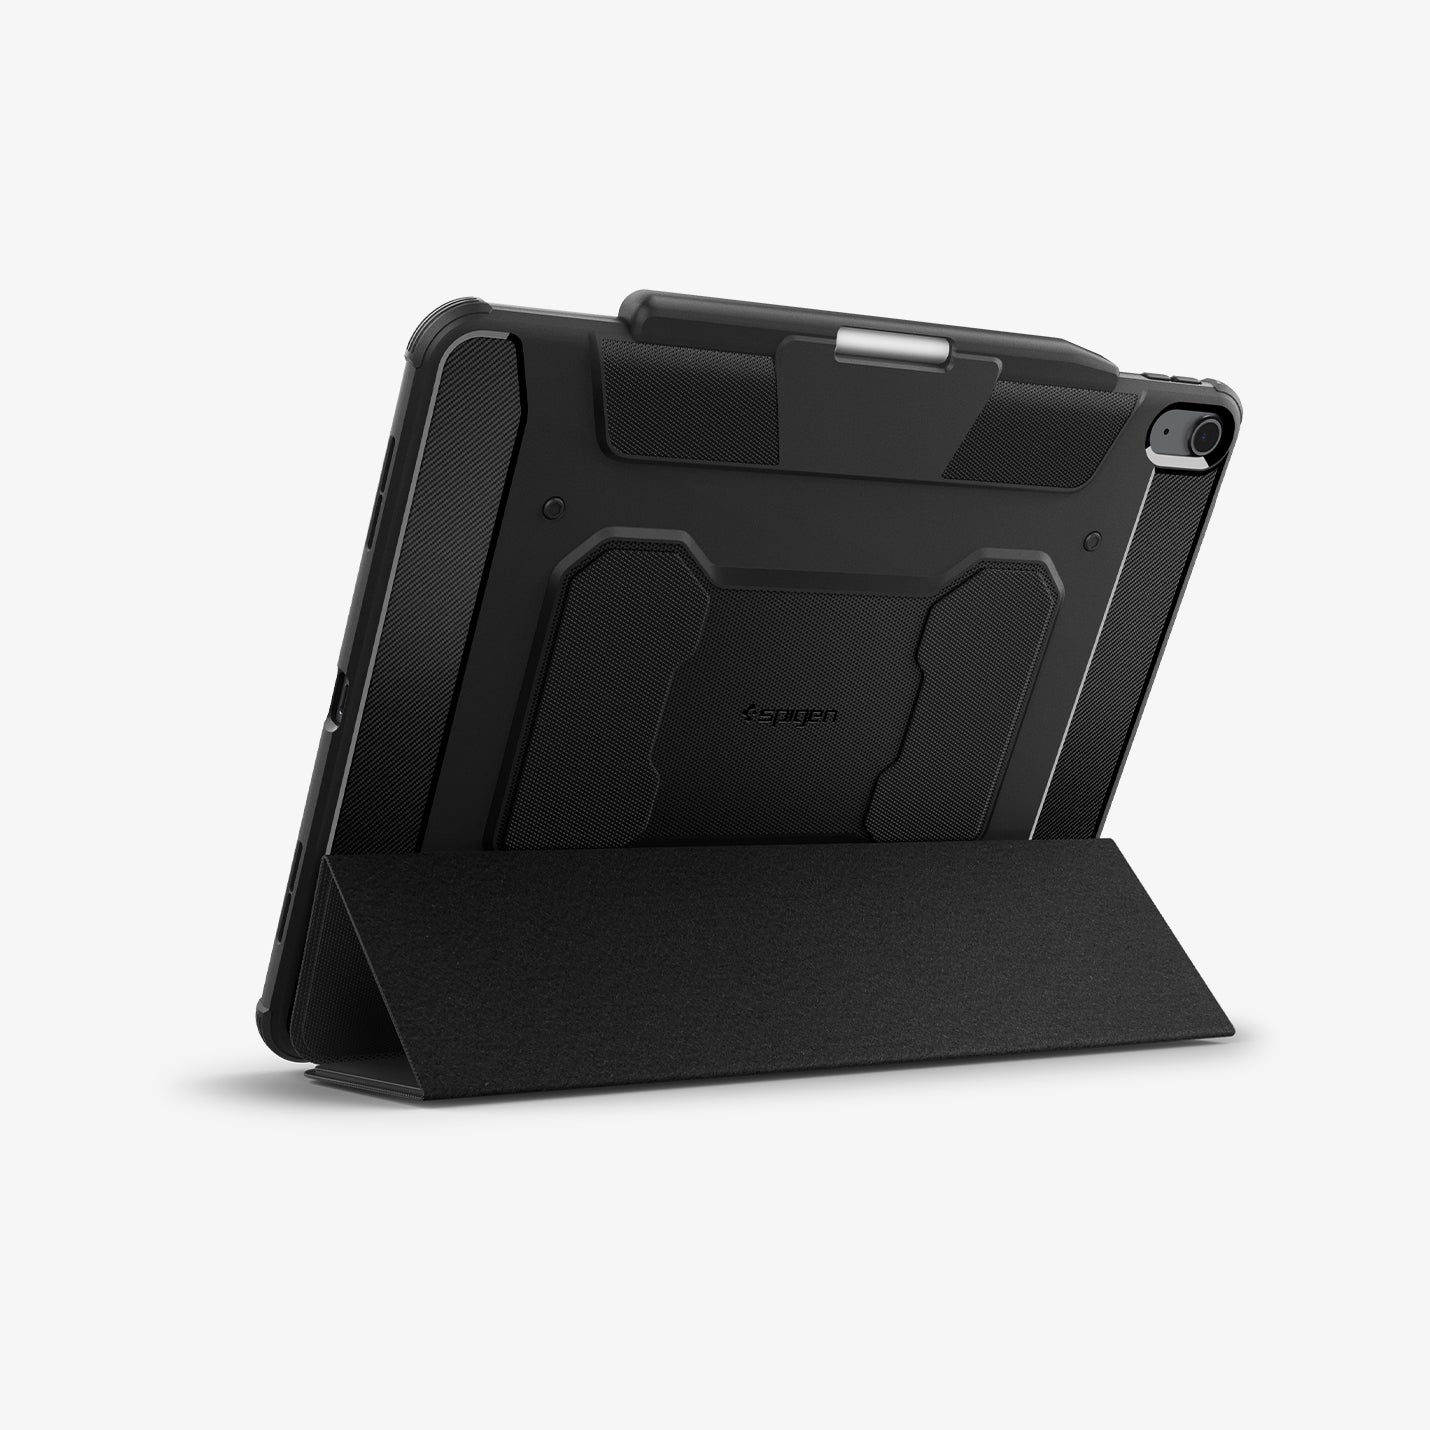 ACS07669 - iPad Air 12.9-inch Case Rugged Armor Pro in Black showing the back, with front cover propped up as a kickstand and a stylus pen attached